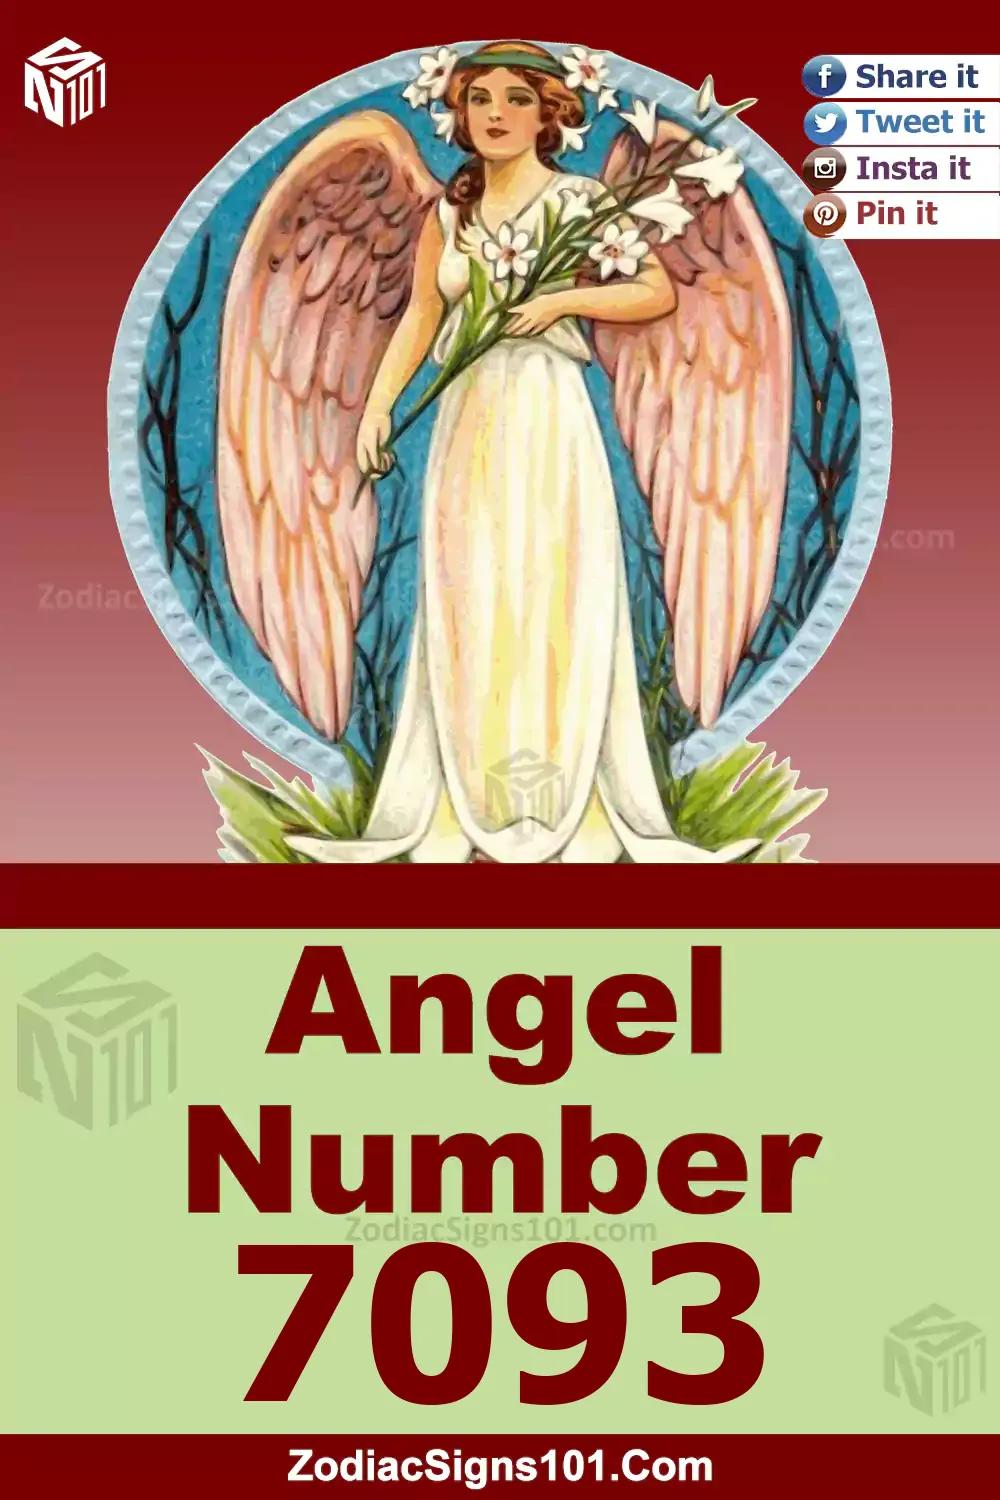 7093 Angel Number Meaning